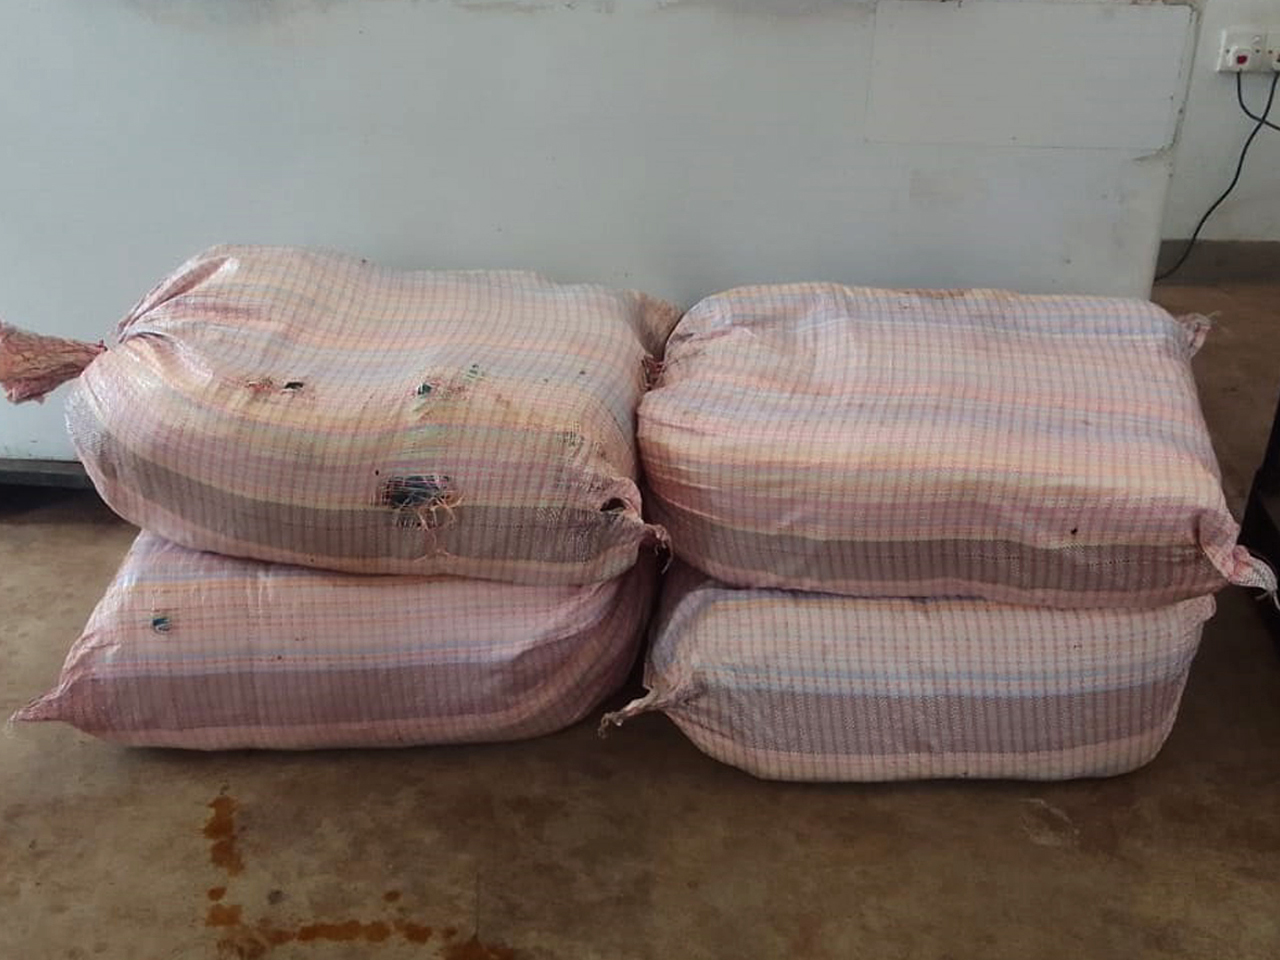 Five suspects nabbed with over 200kg of heroin in high seas